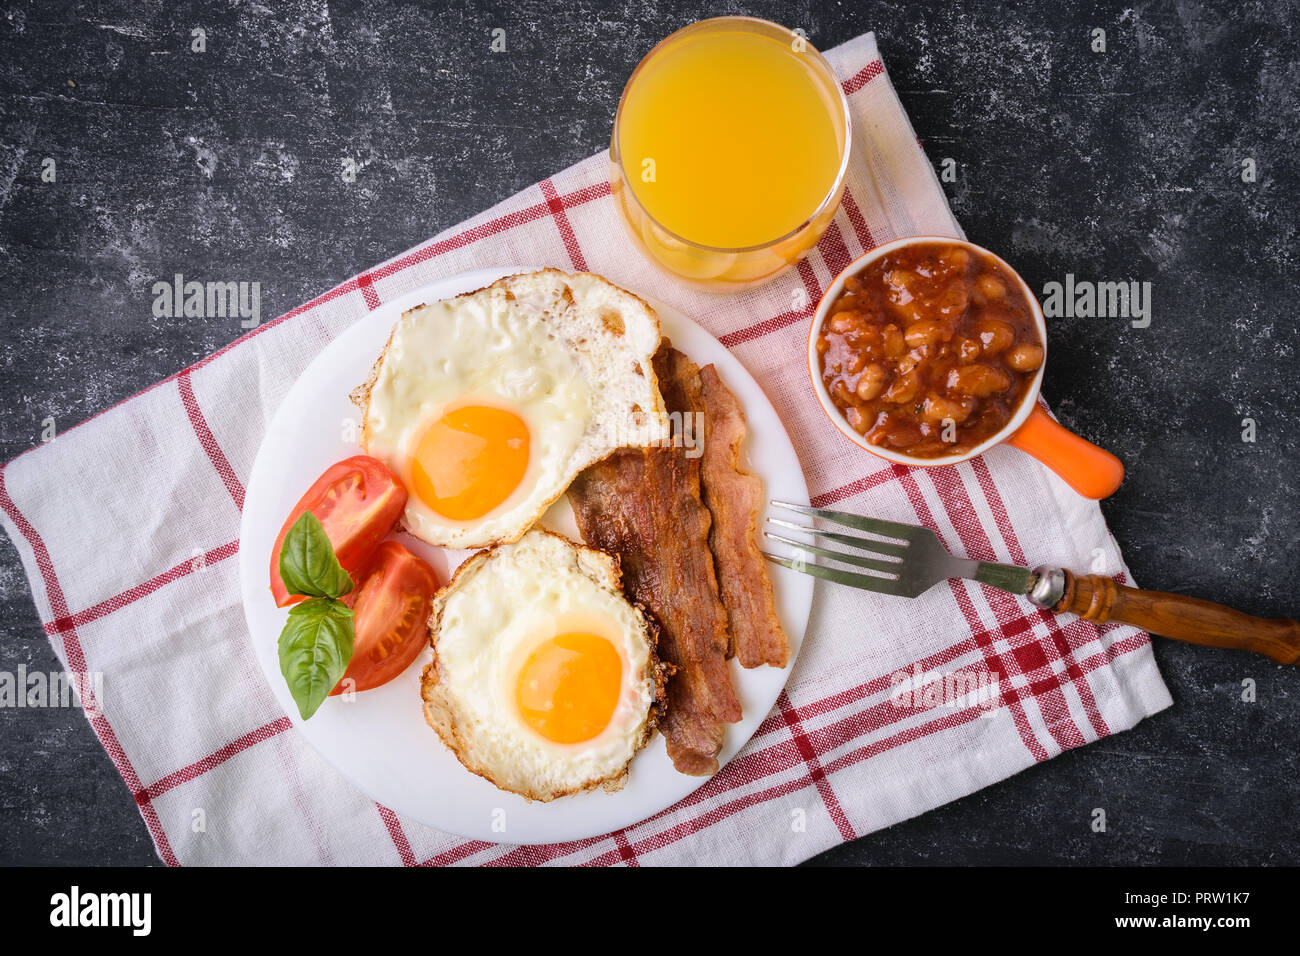 English breakfast - bacon, fried eggs, beans and orange juice. Served on white plate with sliced tomato and basil leaves. Dark grunge concrete table b Stock Photo